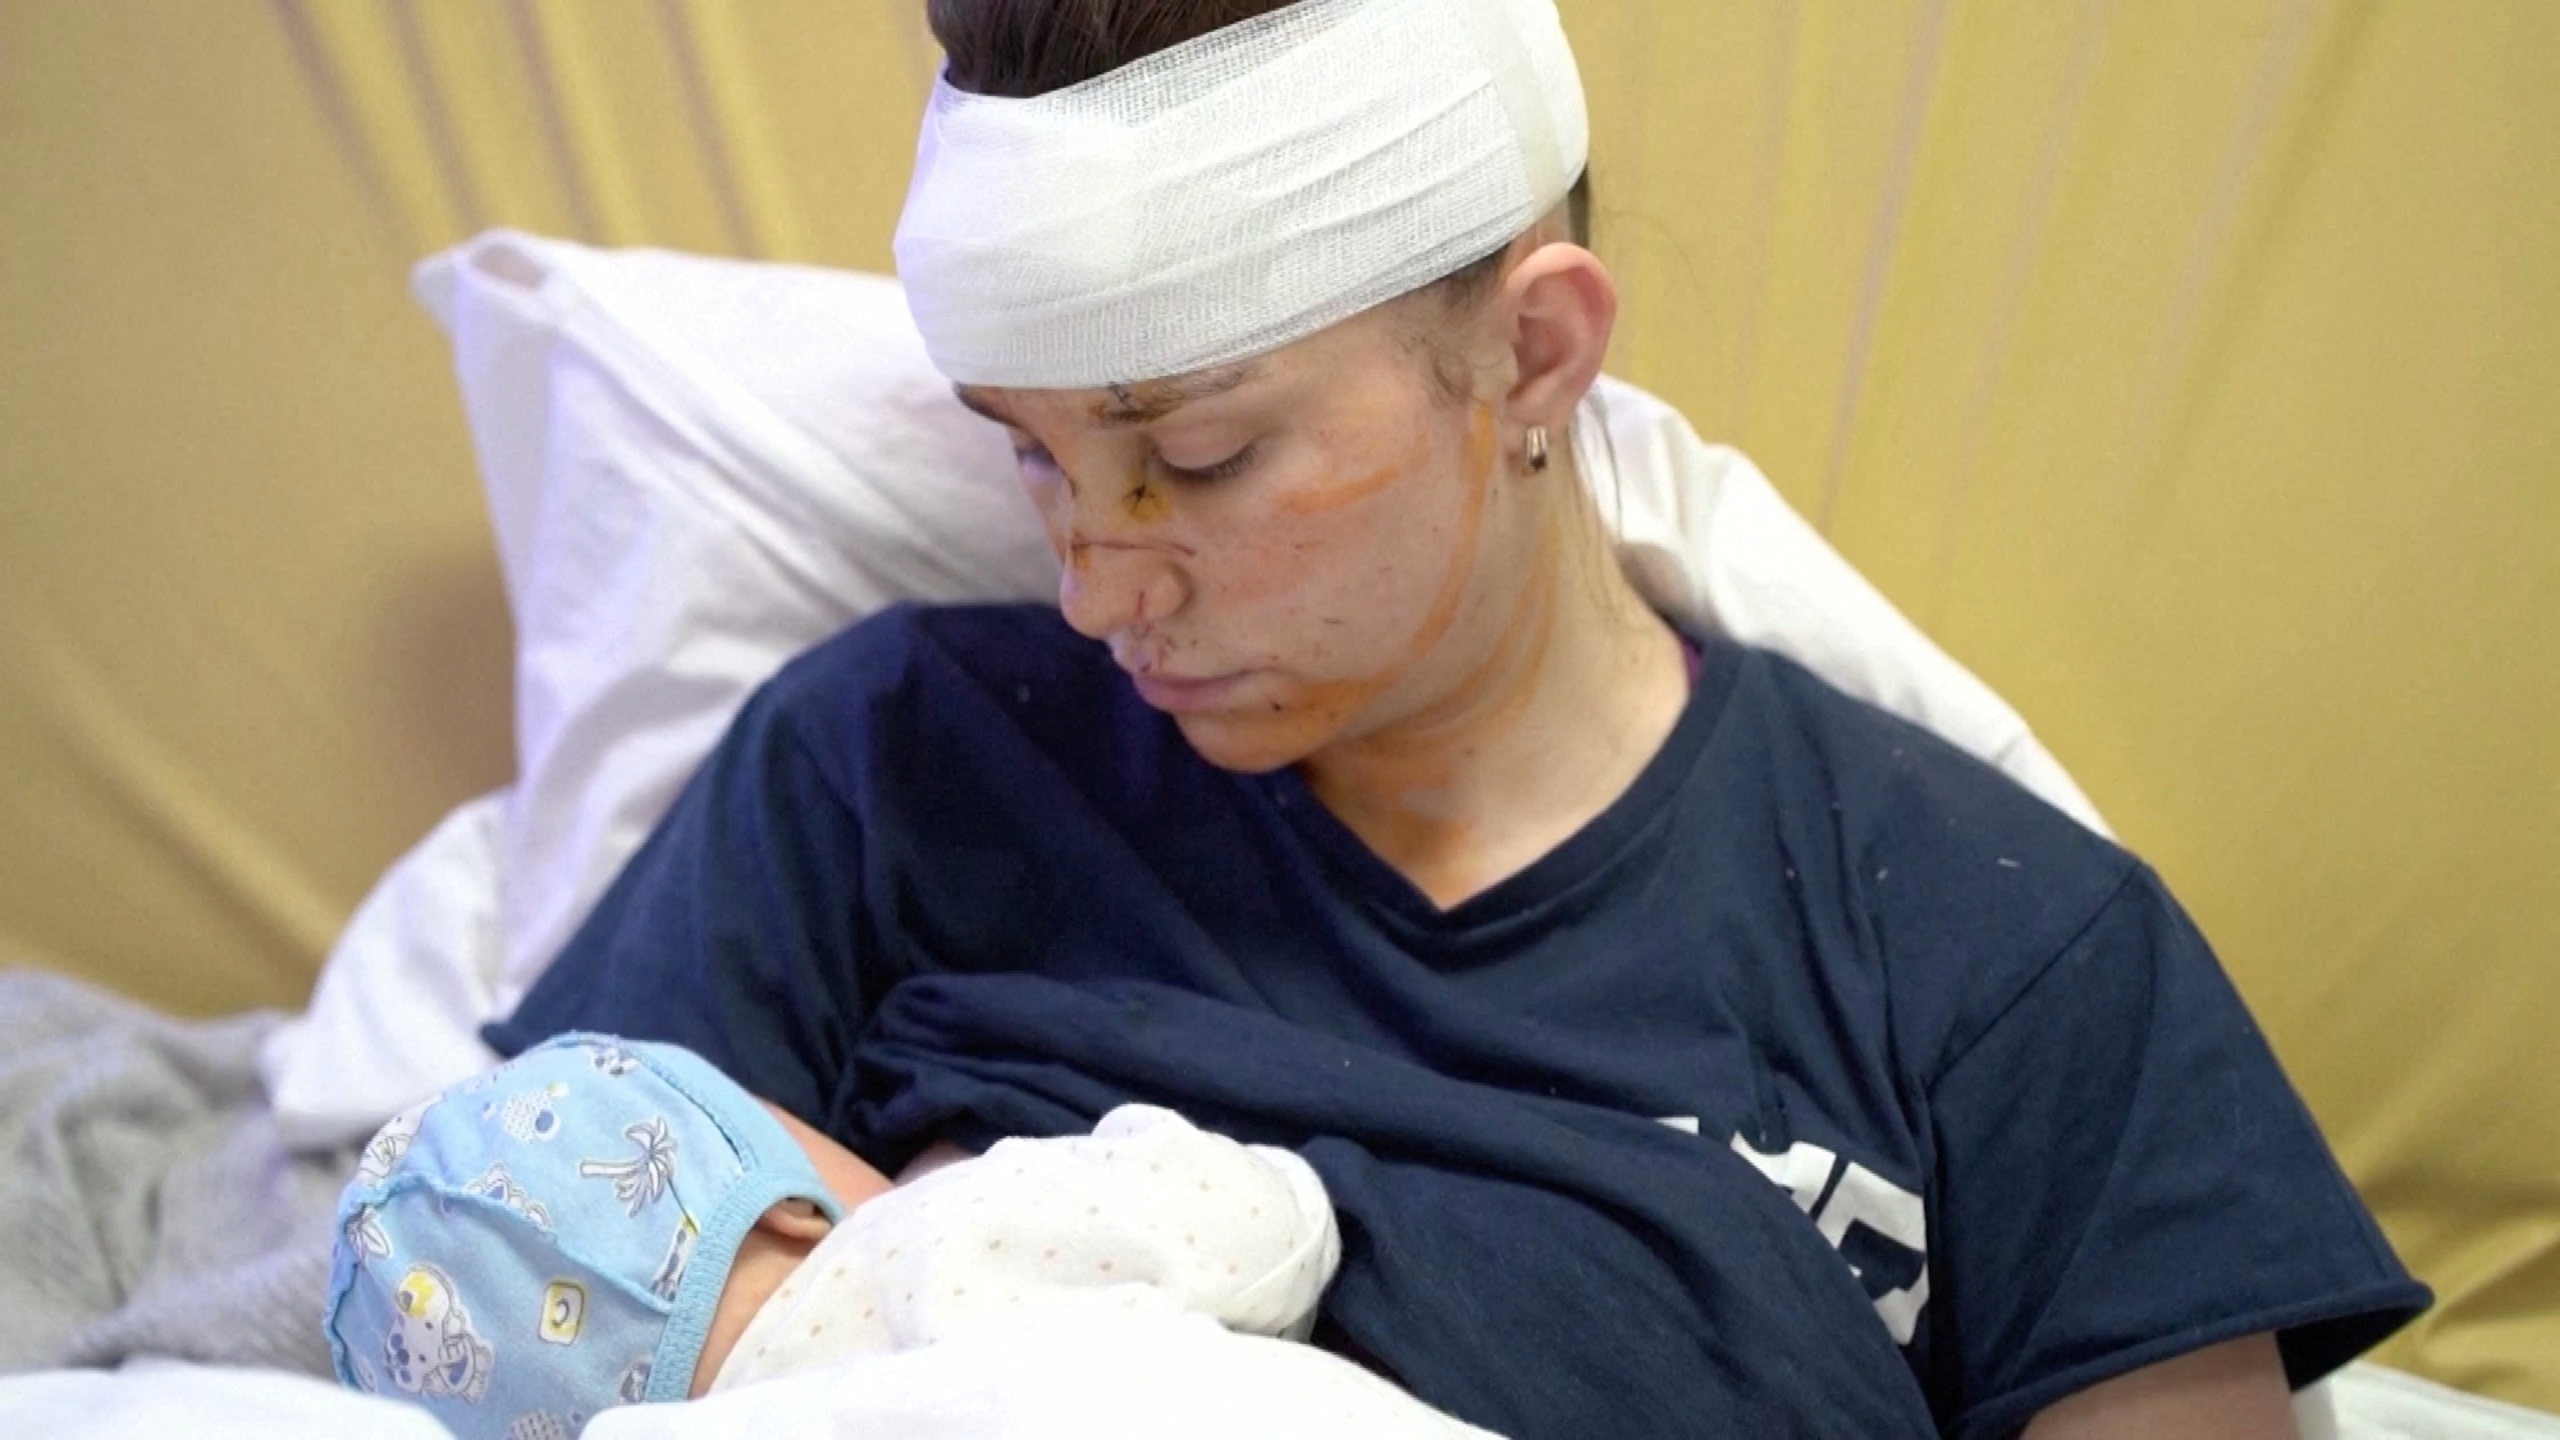 Olga, a 27-year-old Ukrainian woman seriously wounded while sheltering her baby from shrapnel blasts amid Russia's ongoing invasion of Ukraine, holds her baby Victoria in Kyiv